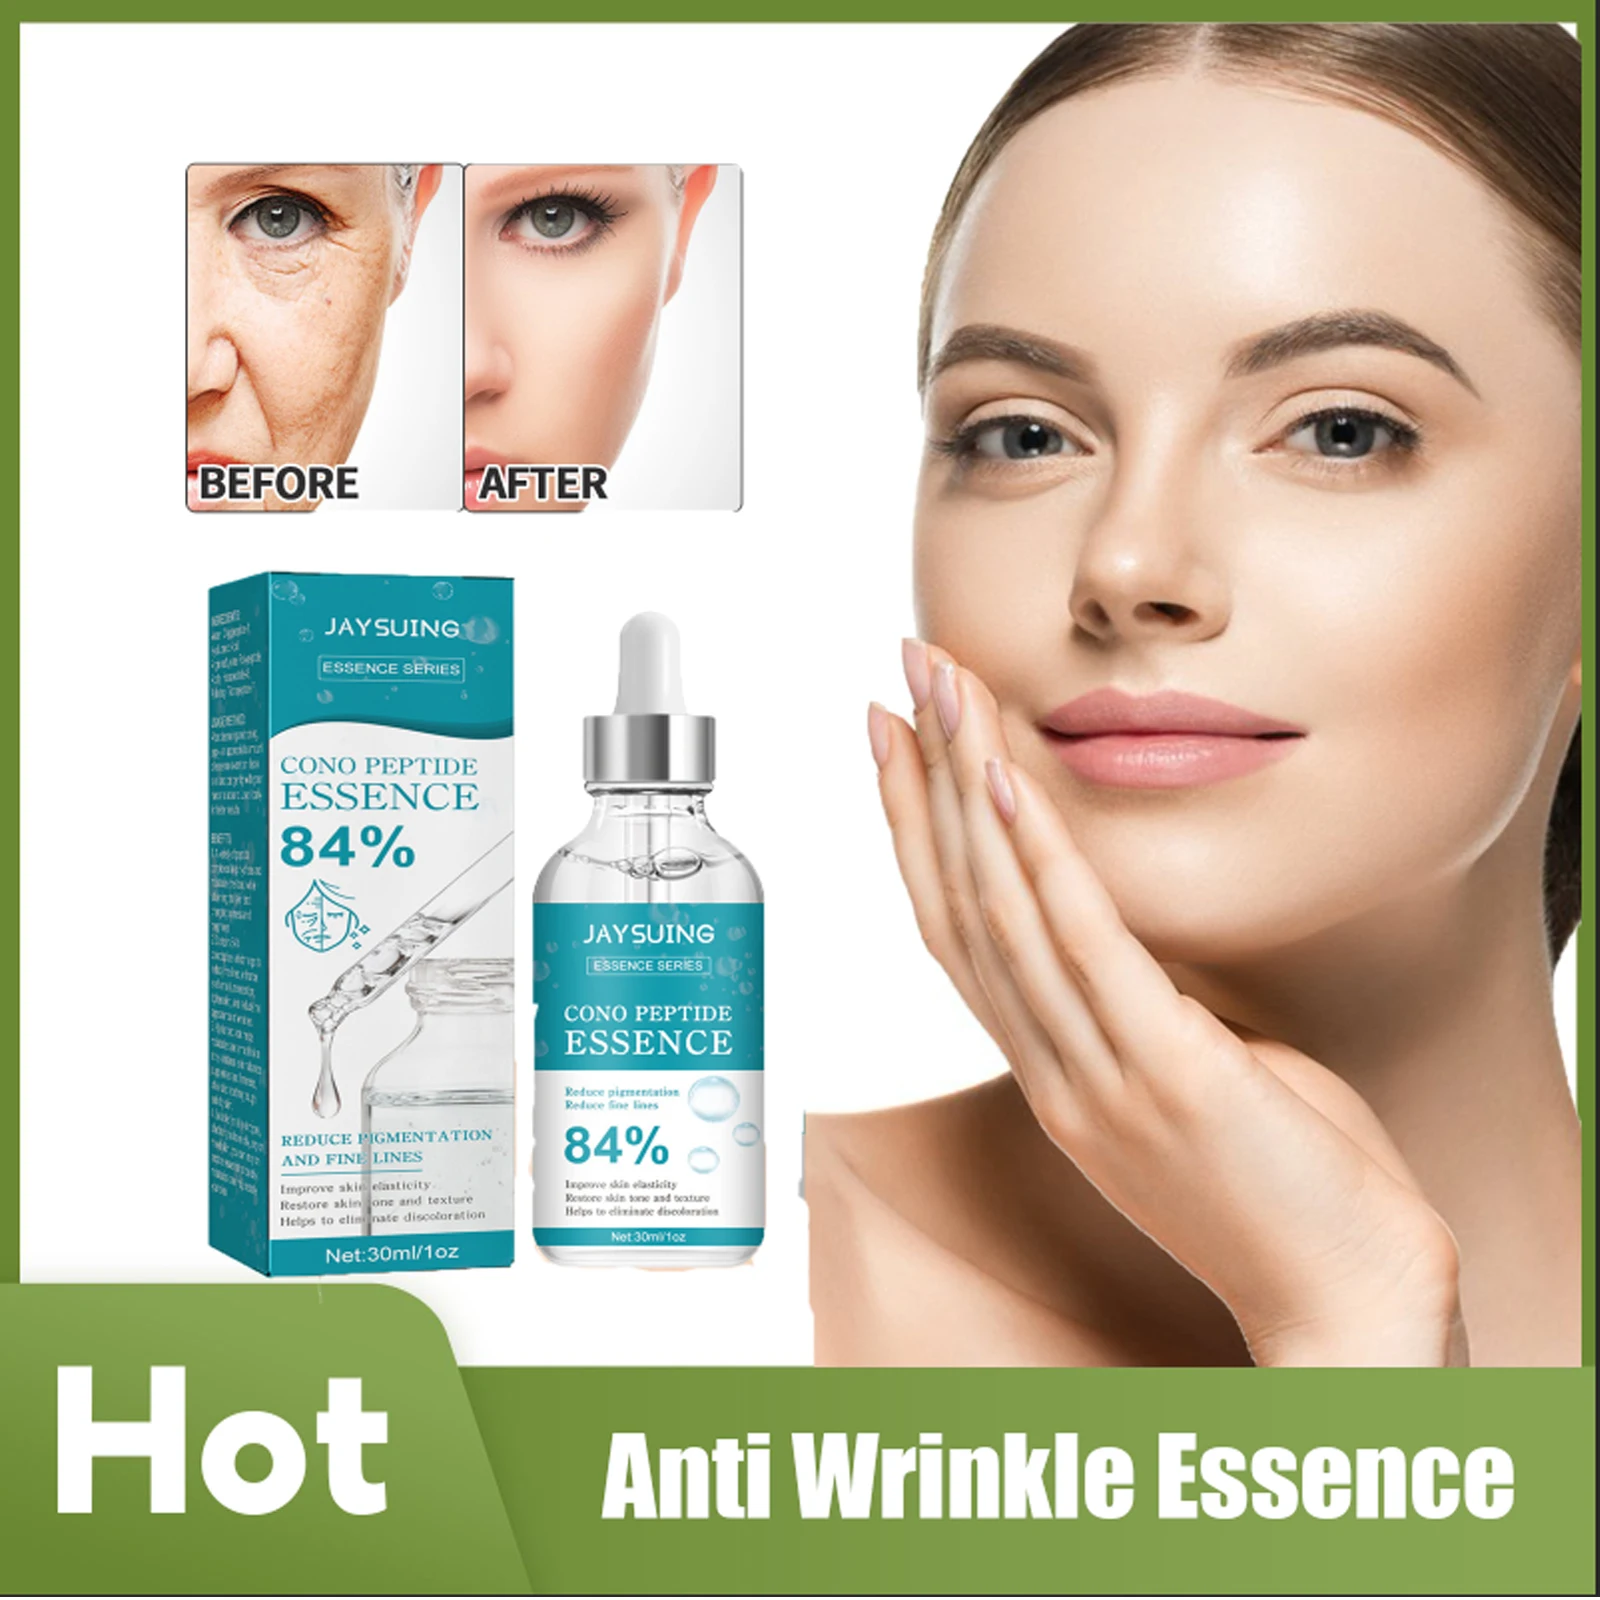 Wrinkle Remove Serum Anti Aging Lifting Fade Fine Line Whitening Dark Spots Moisturizing Firming Skin Cono Peptide Essence 84% line repair firm forever youth serum